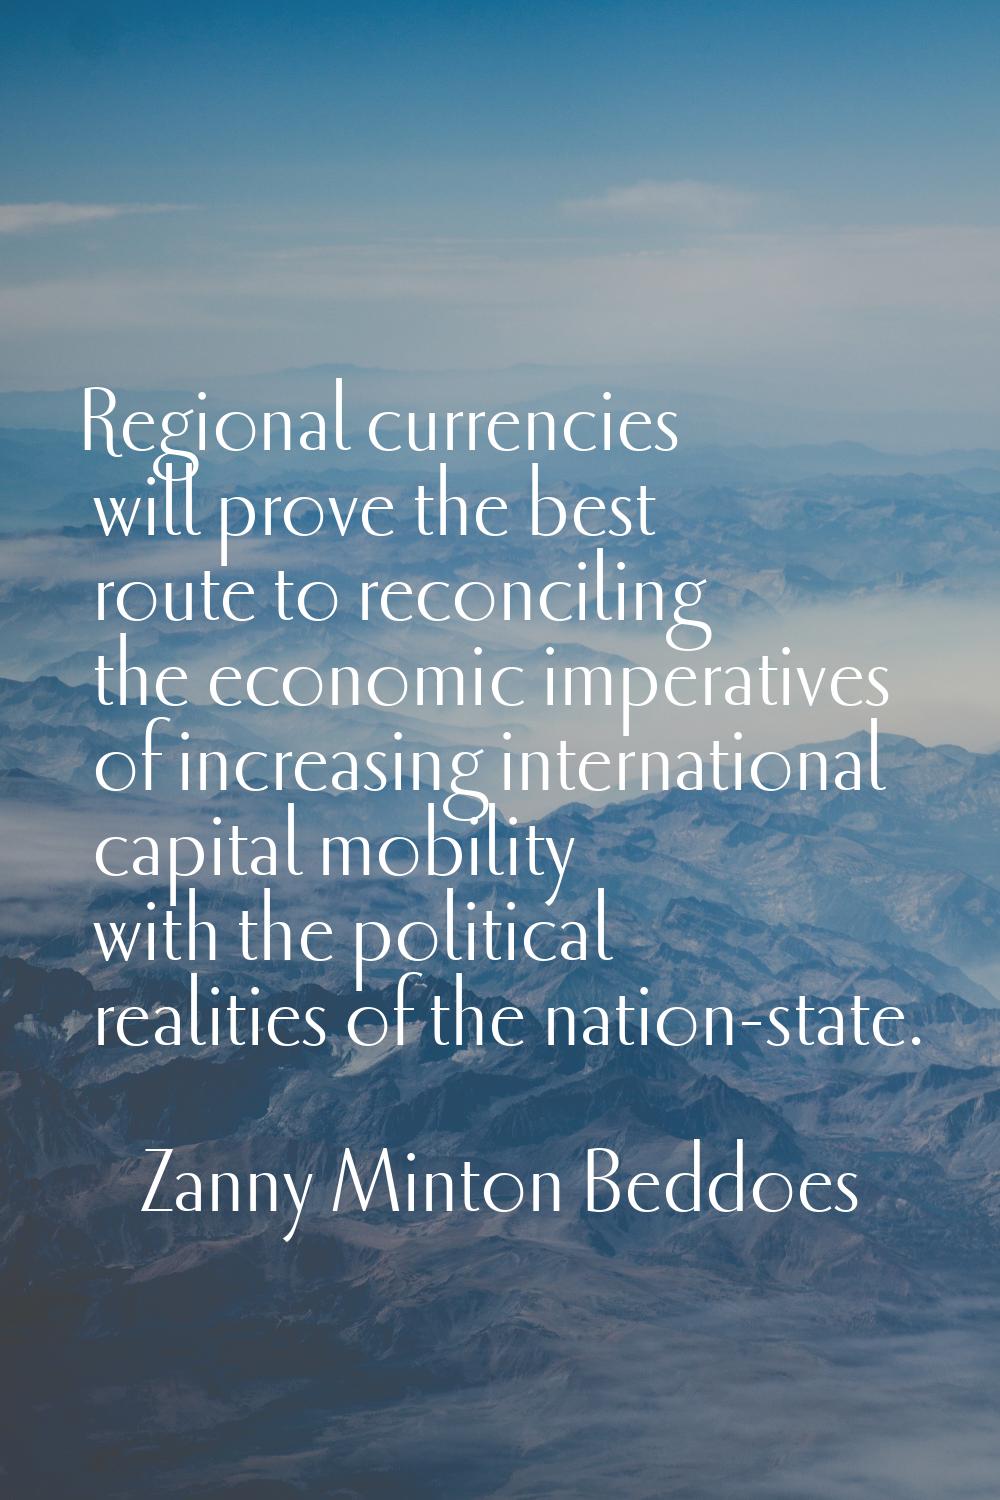 Regional currencies will prove the best route to reconciling the economic imperatives of increasing